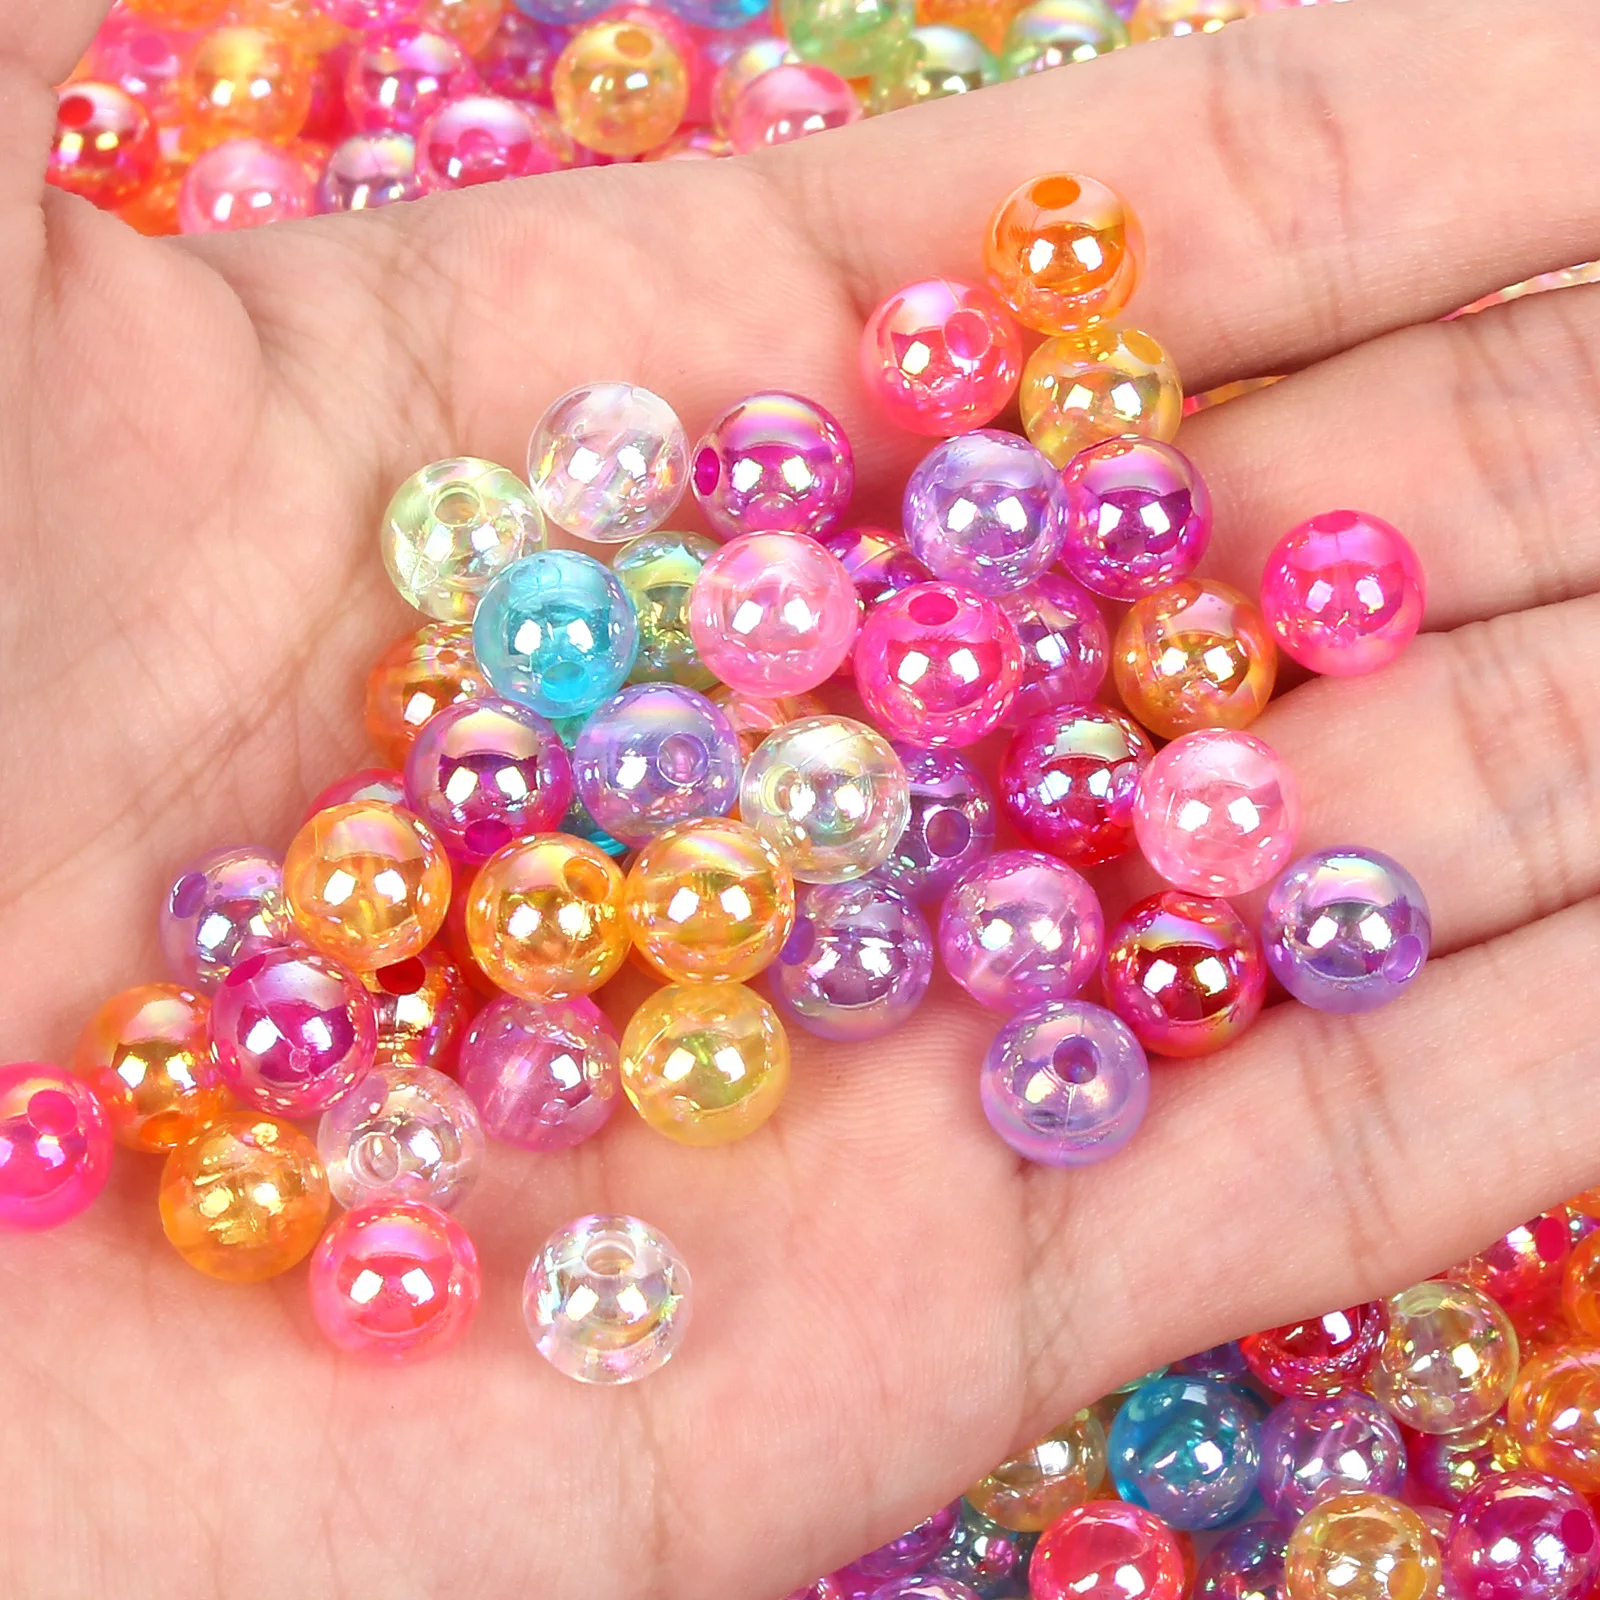 New 6/8/10mm Transparent Faceted Flat Acrylic Beads Loose Spacer Beads for  Jewellery Making DIY Handmade Bracelet Accessories